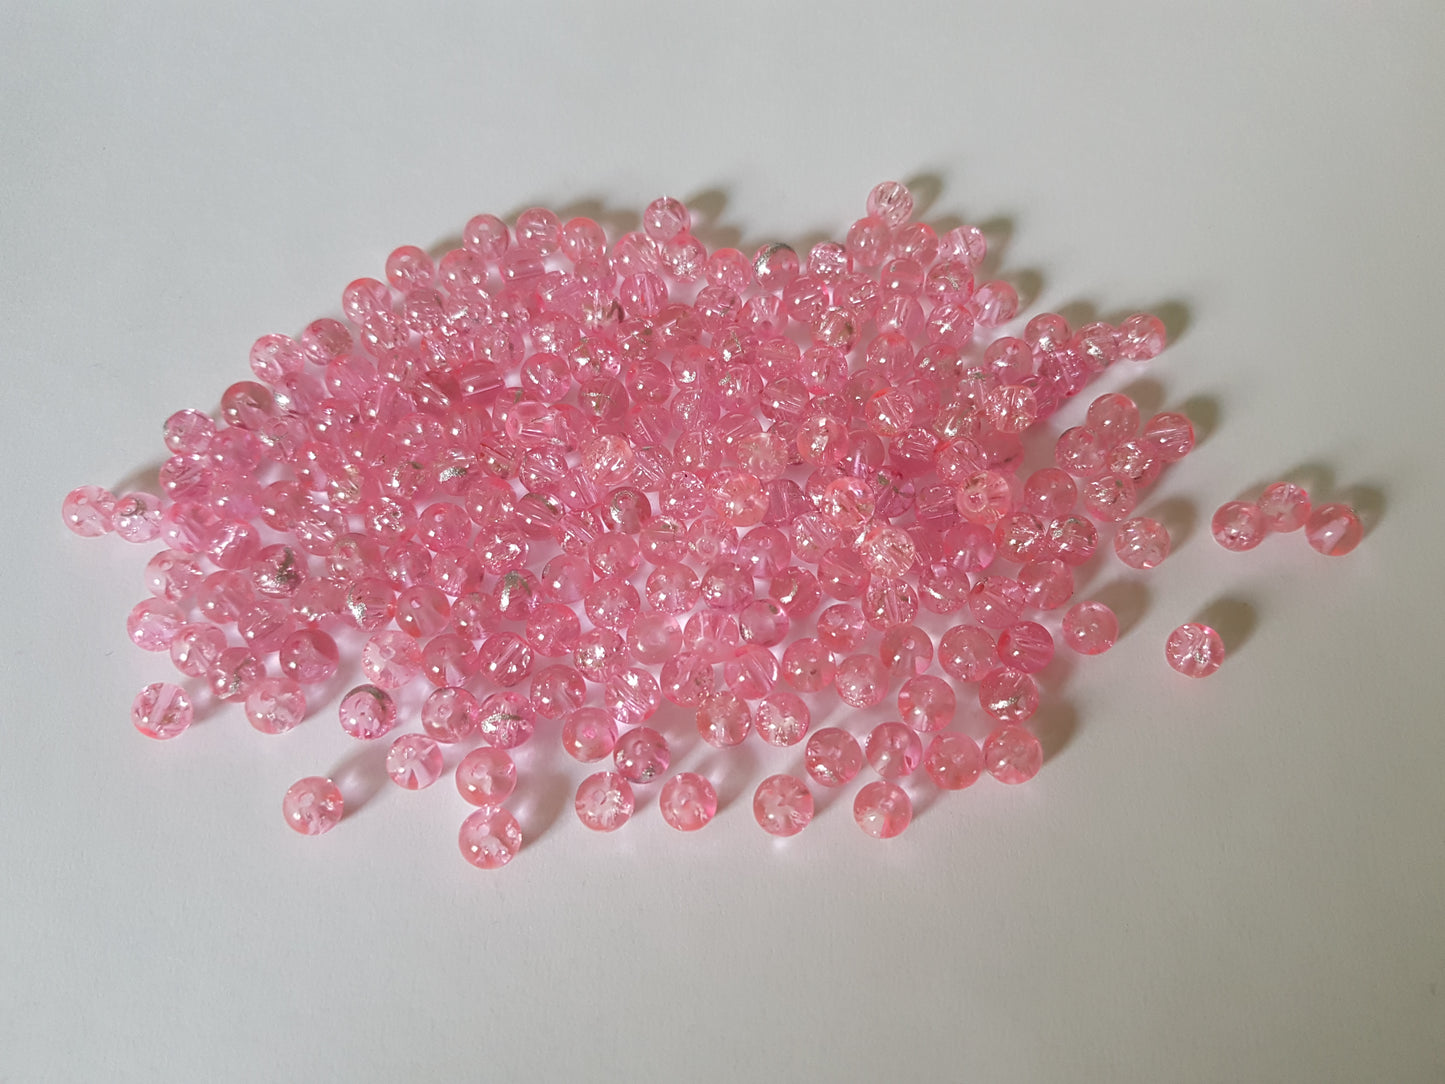 6mm drawbench crackle beads - pink